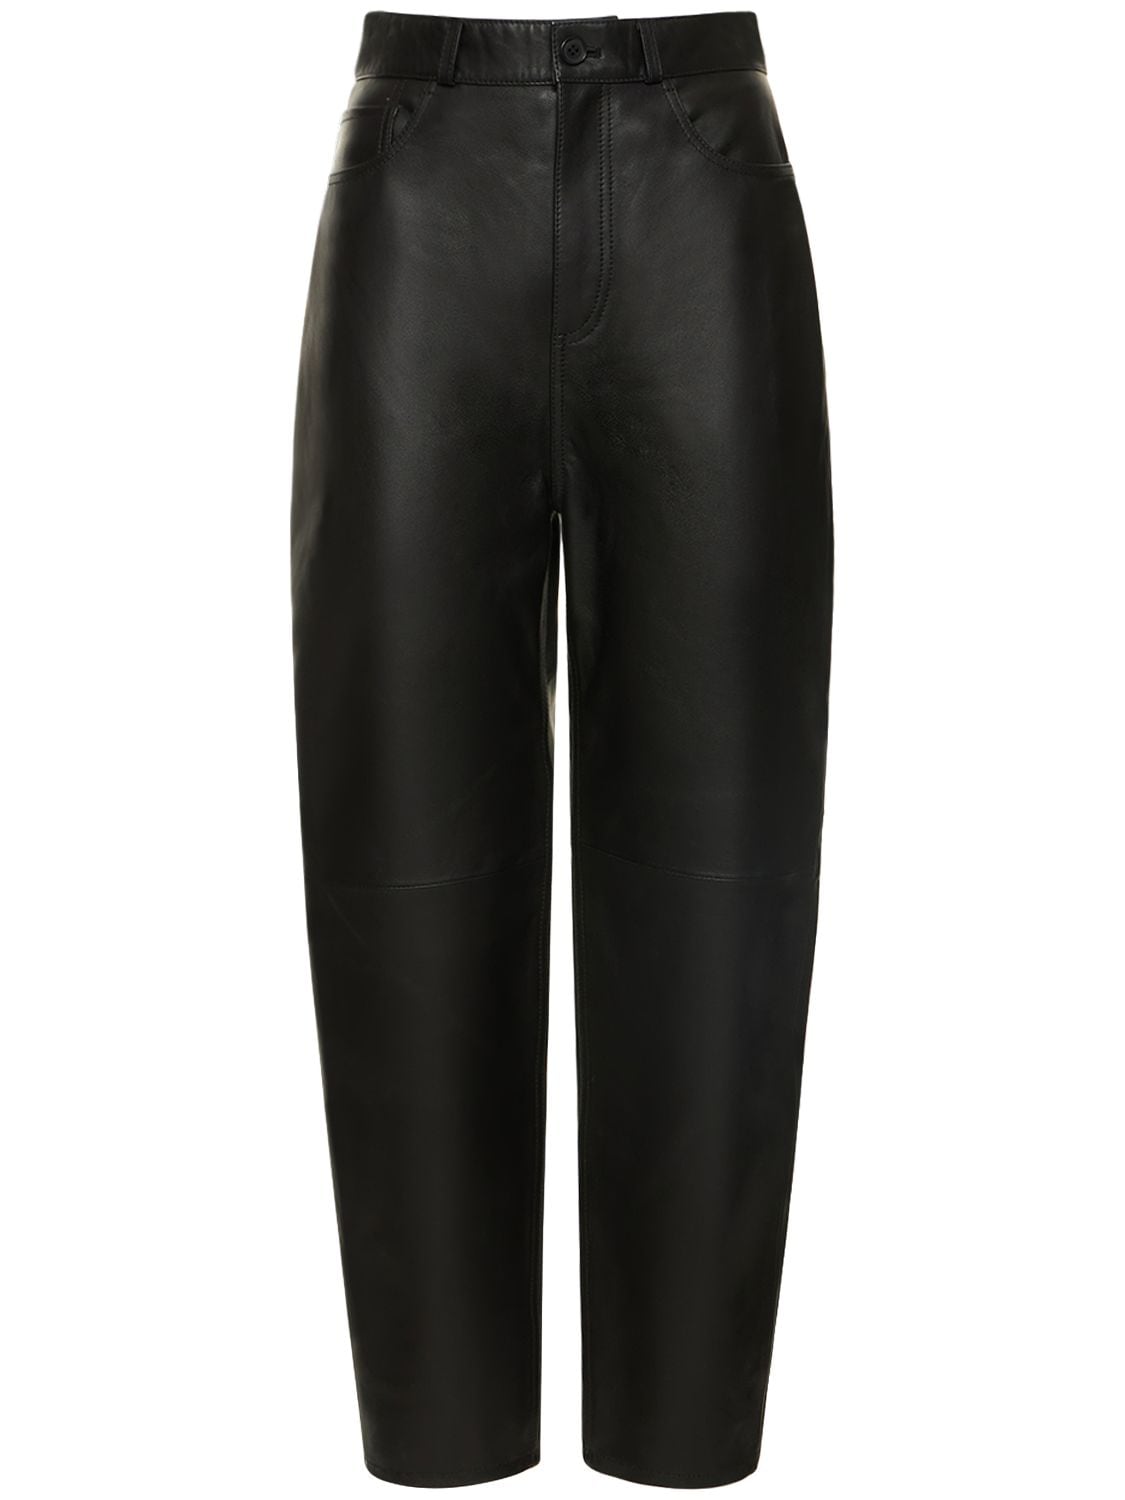 TOTEME Tapered Leather Pants